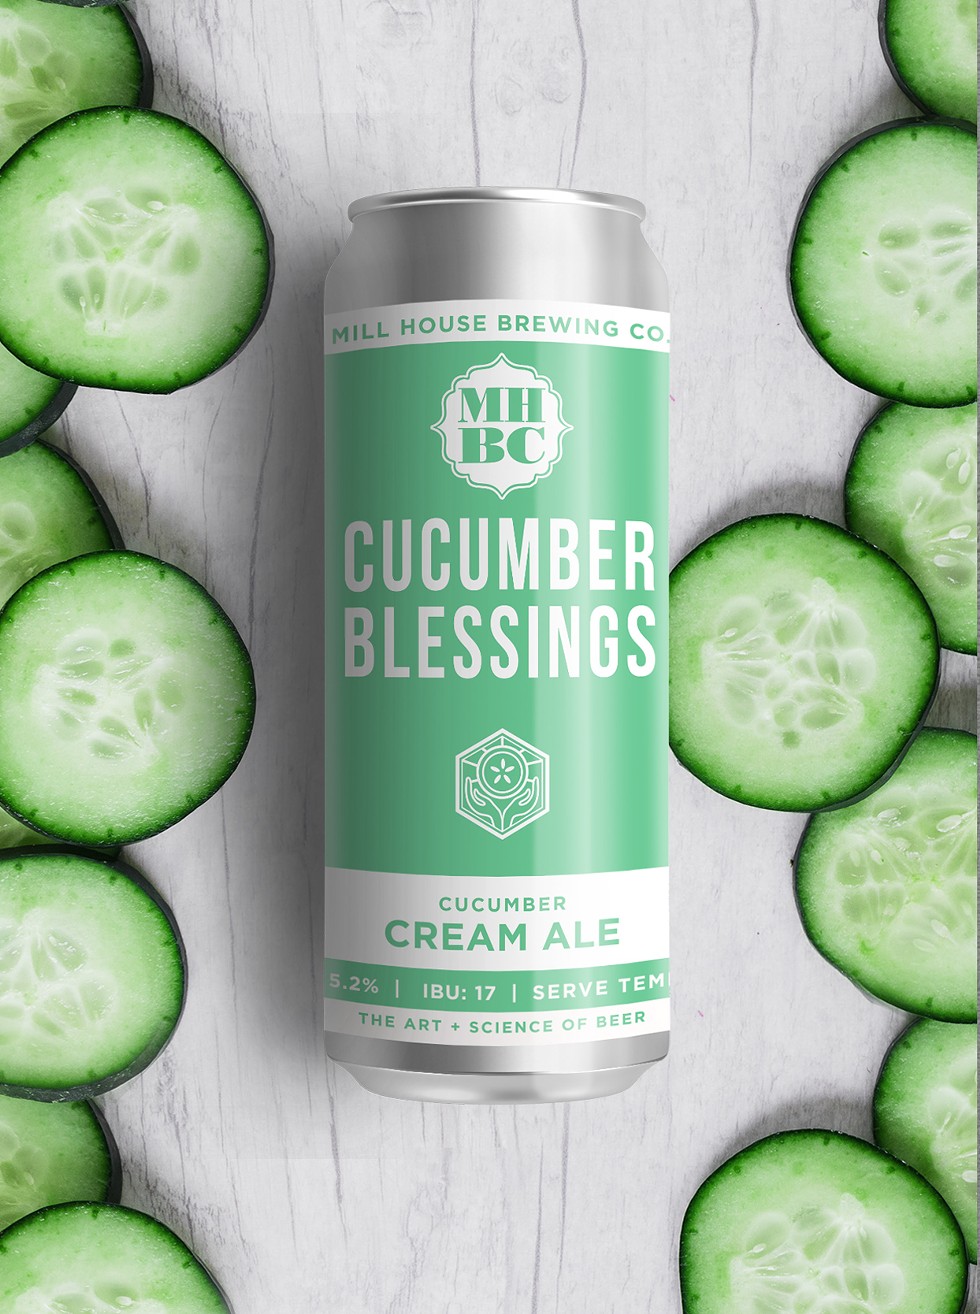 Our Cucumber Blessings can with it's new label